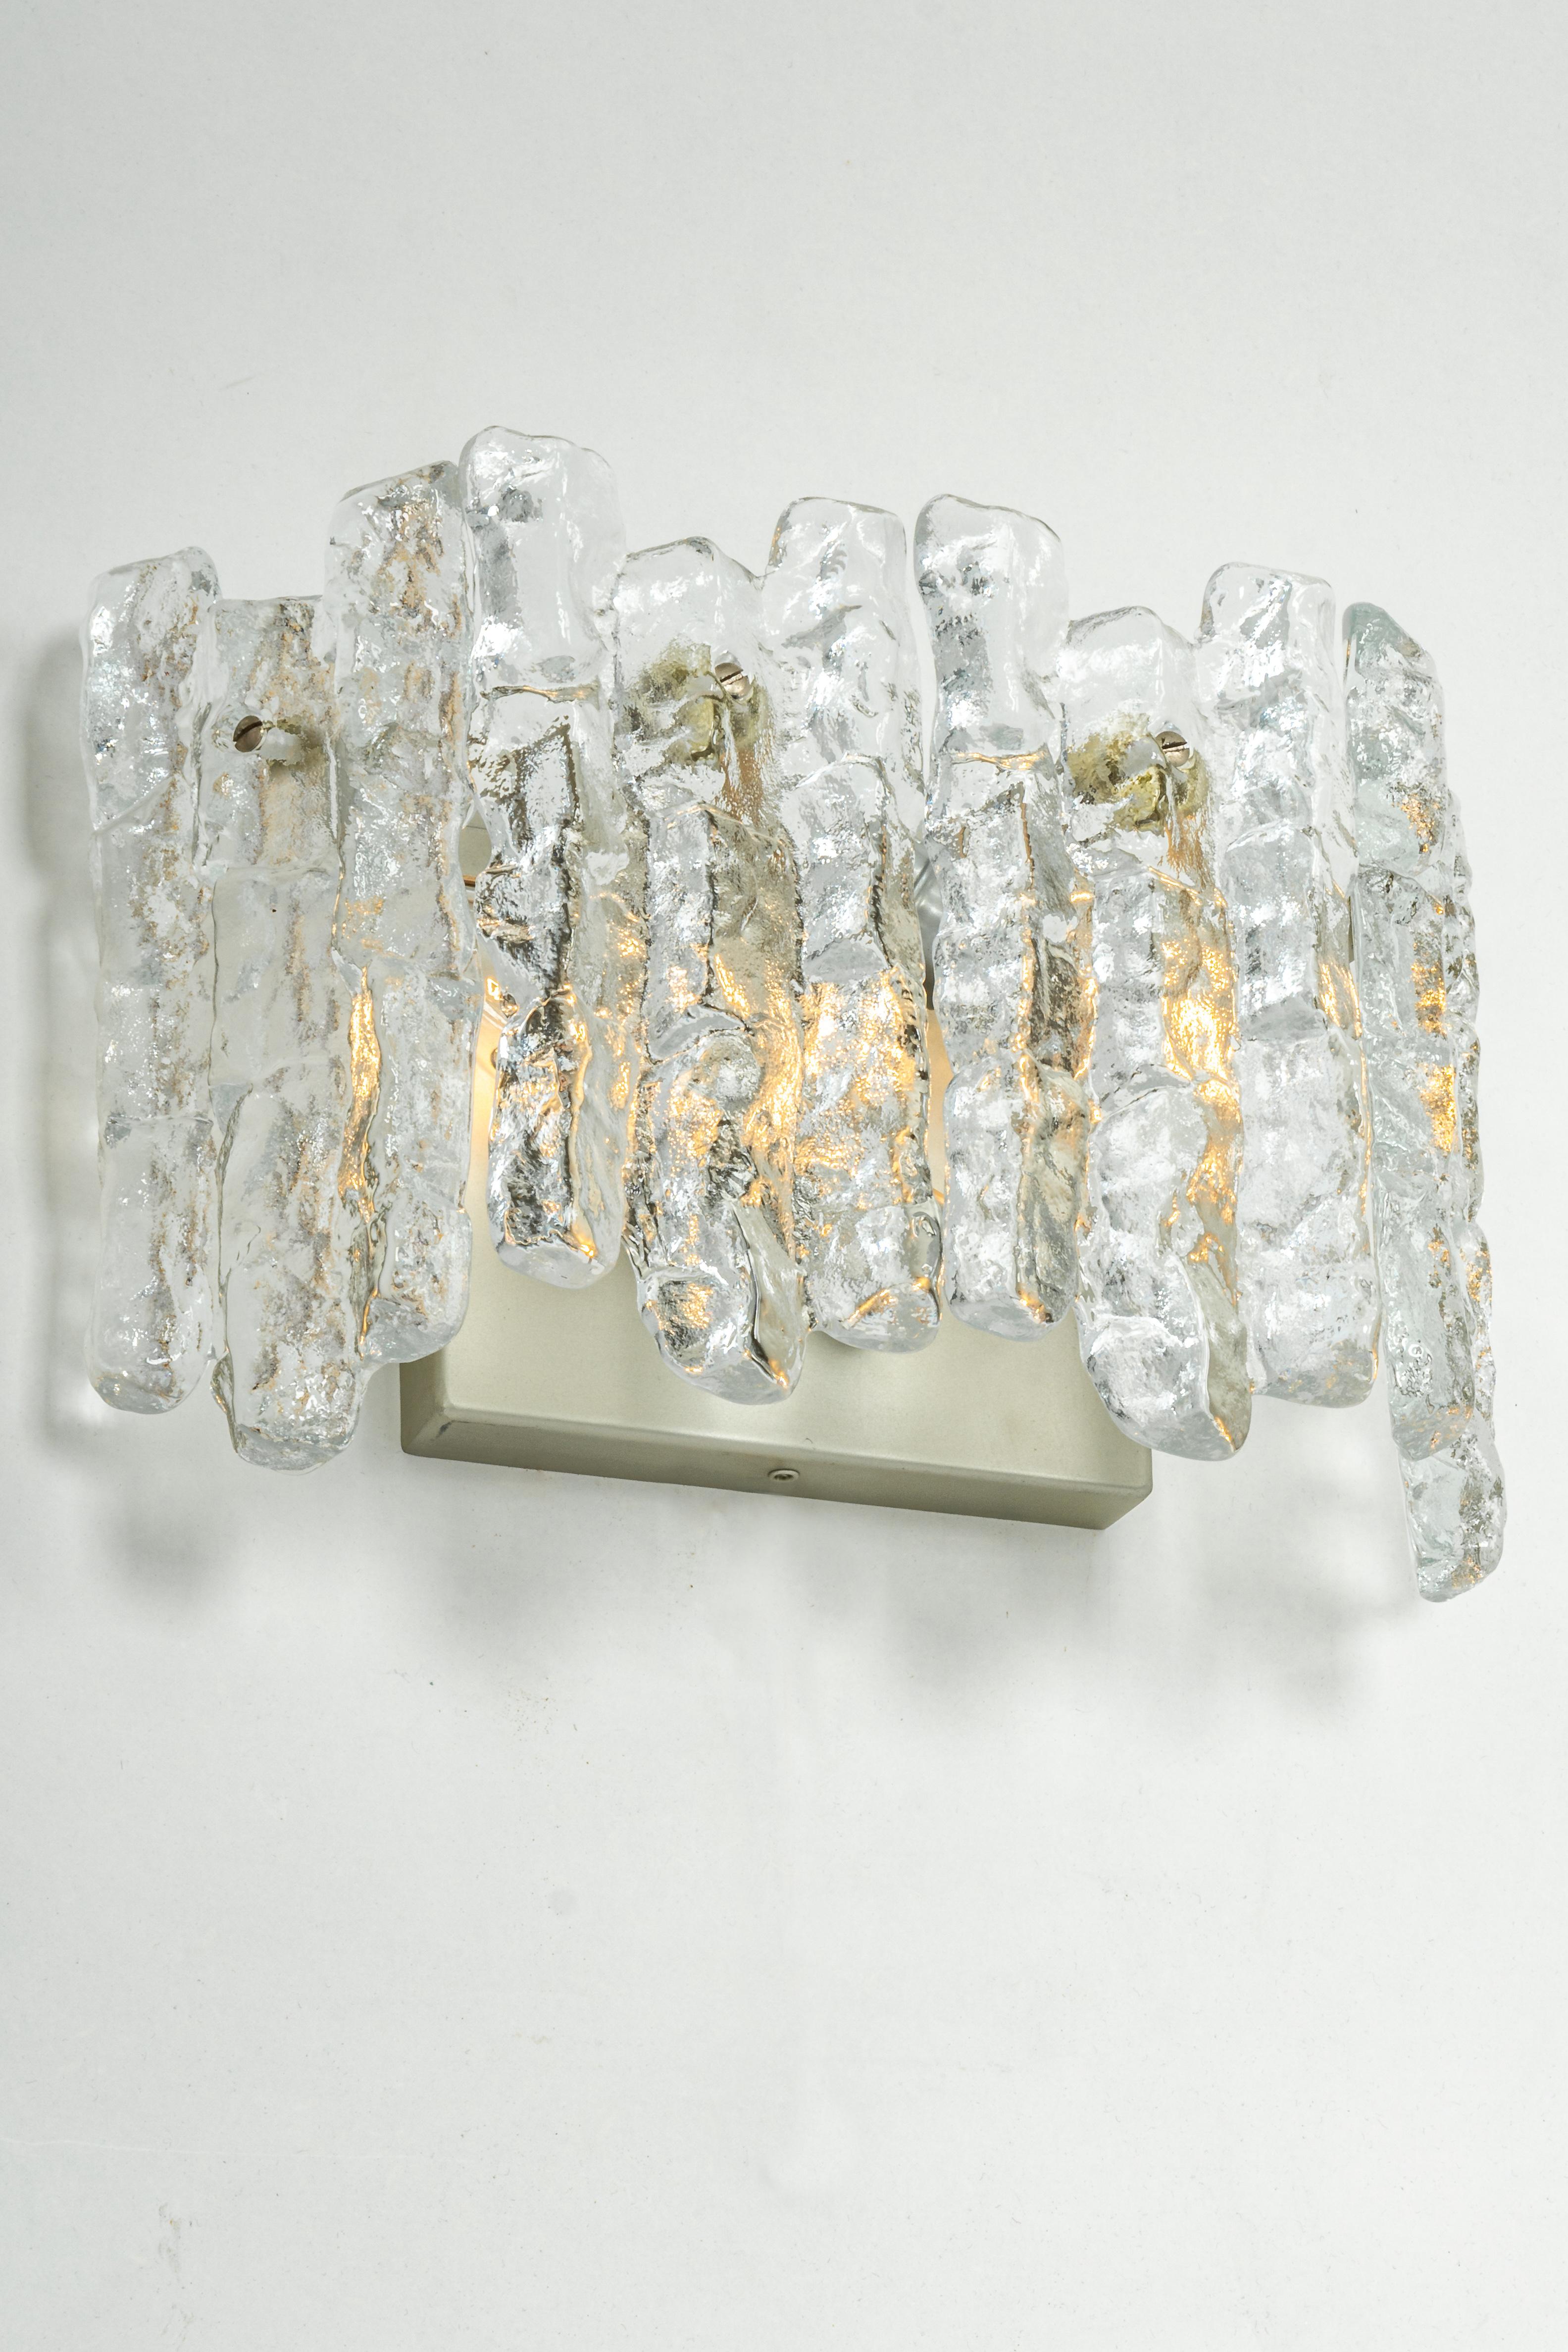 Murano Glass 1 of 2 Pairs of Large Kalmar Sconces Murano Wall Lights, Austria, 1960s For Sale